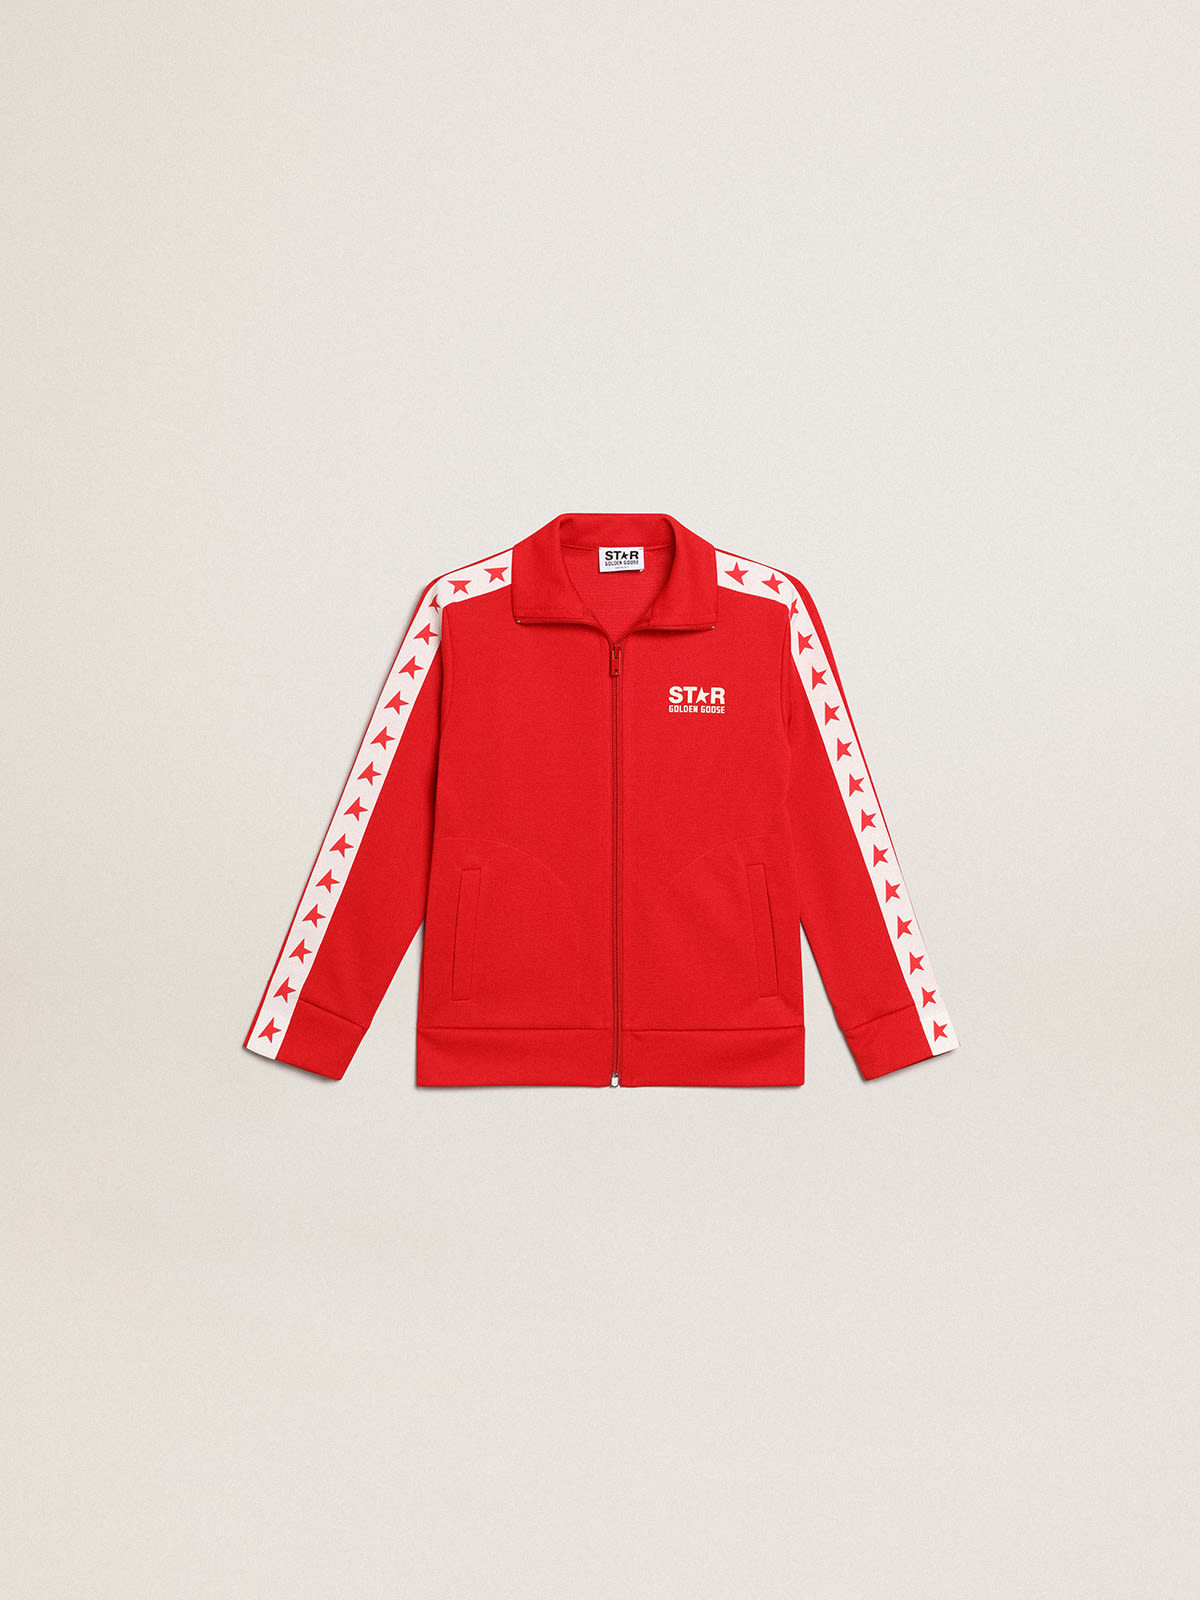 Golden Goose - Red zipped sweatshirt with white stripe and red stars in 